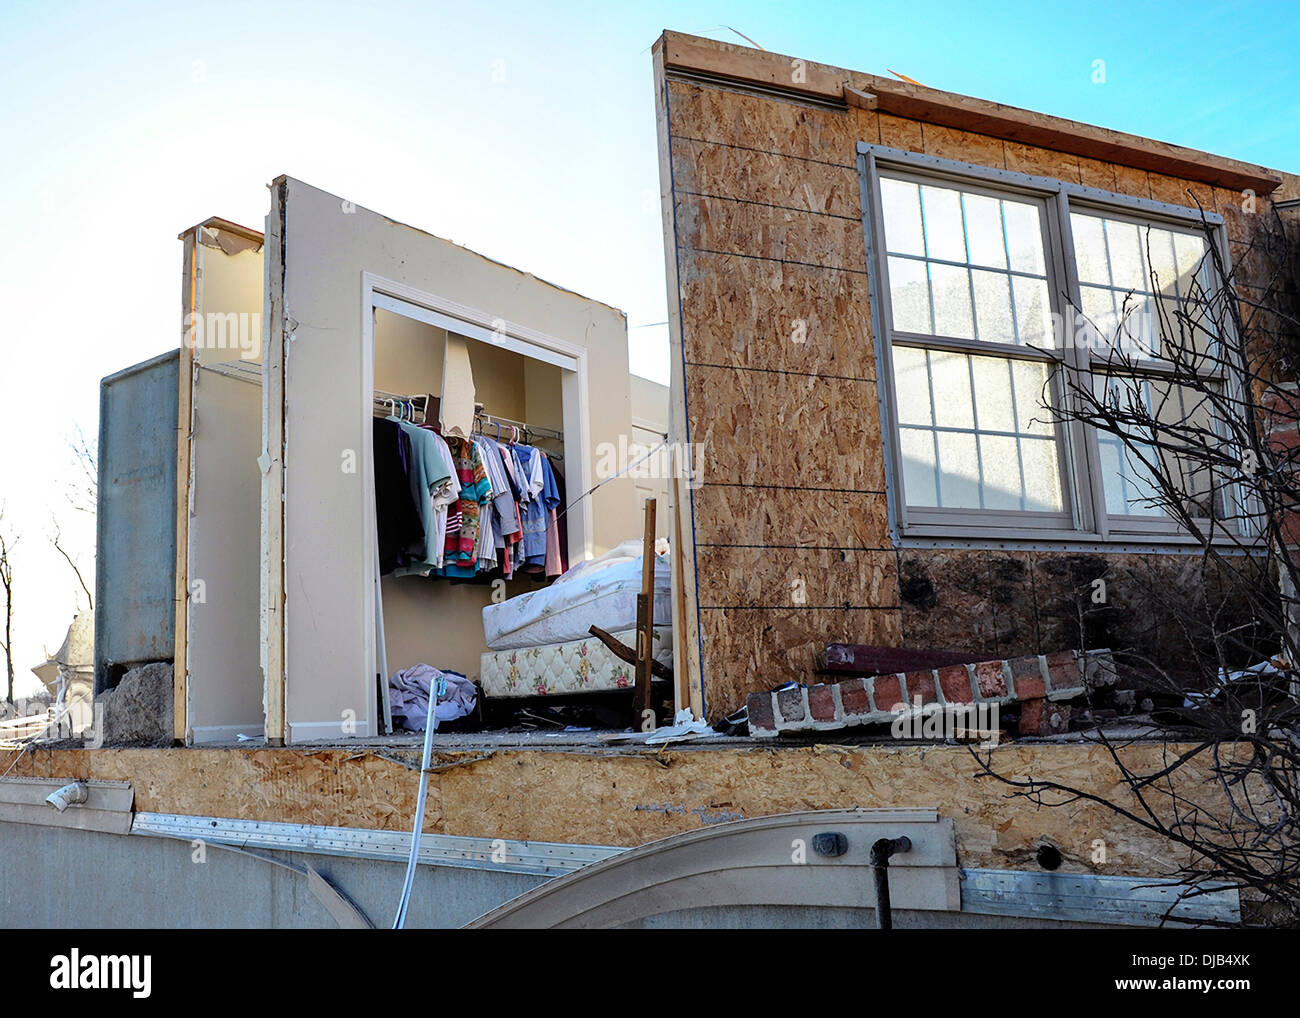 A bedroom closet remains untouched as the rest of the home was destroyed by an EF-4 tornado in the aftermath November 19, 2013 in Washington, IL. The tornado left a path of destruction that stretched for more than 46 miles and damaged fourteen-hundred homes. Stock Photo